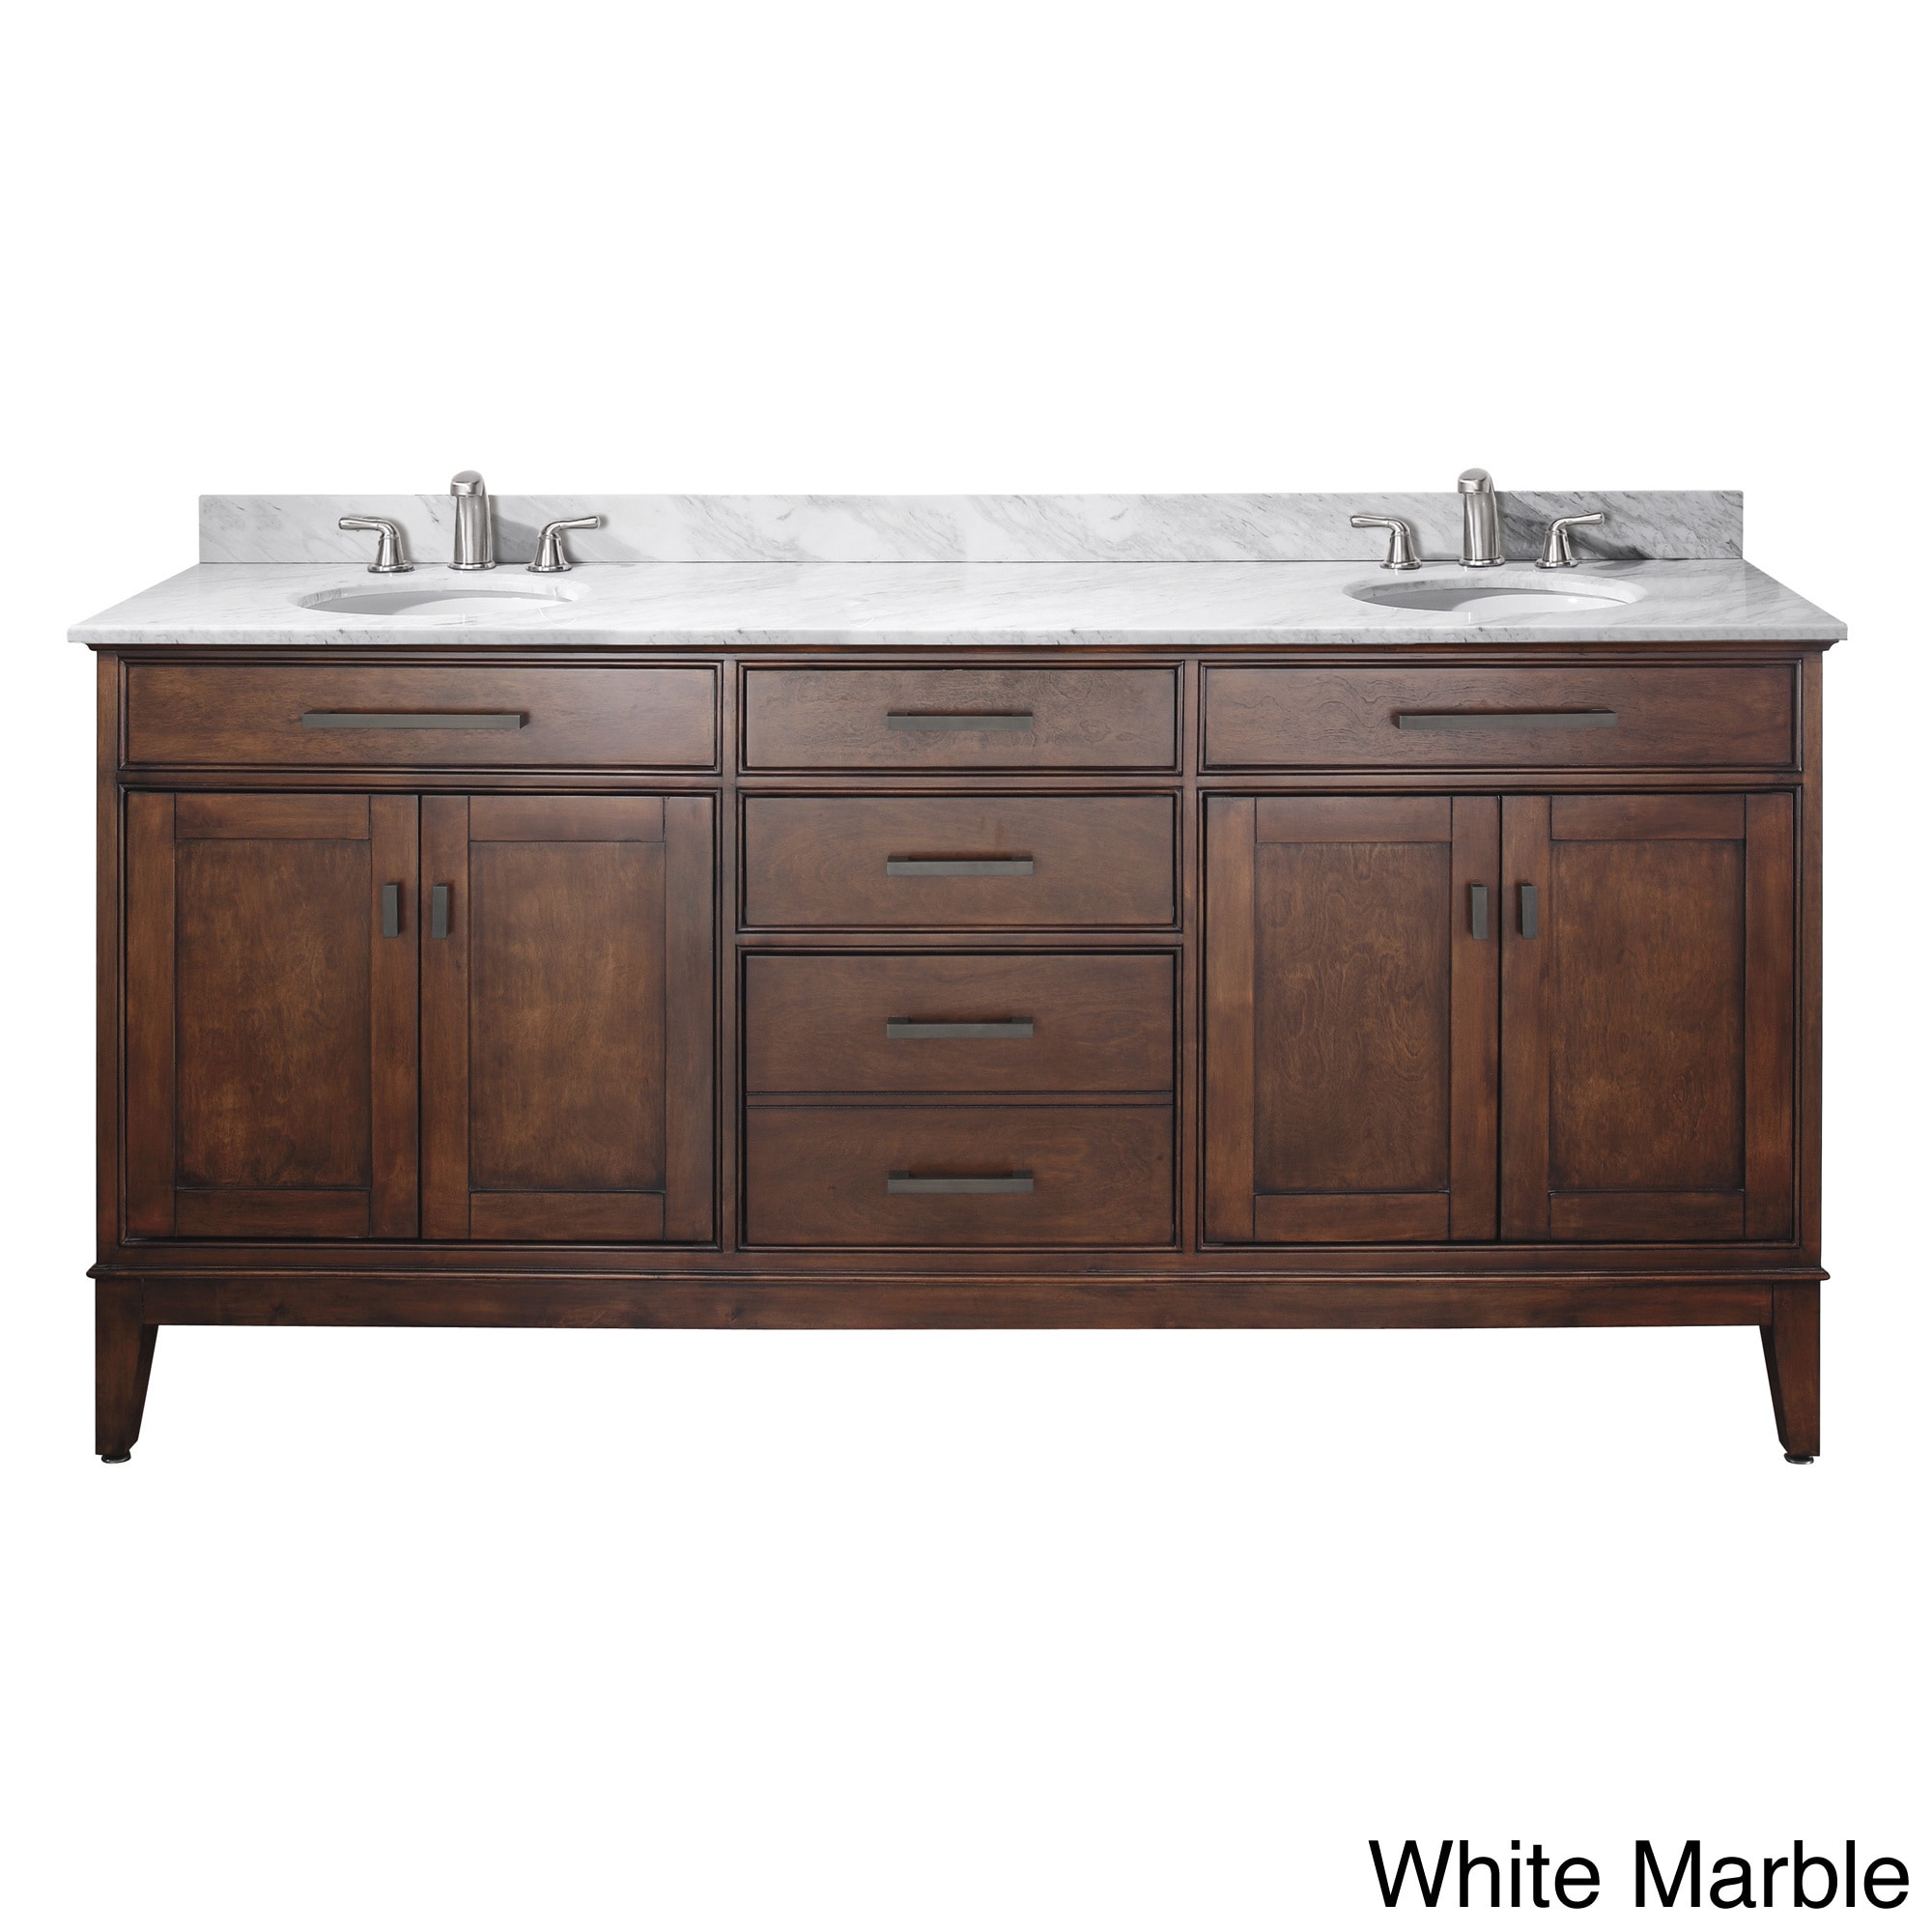 Avanity Madison 72 Inch Double Vanity In Tobacco Finish With Dual Sinks And Top